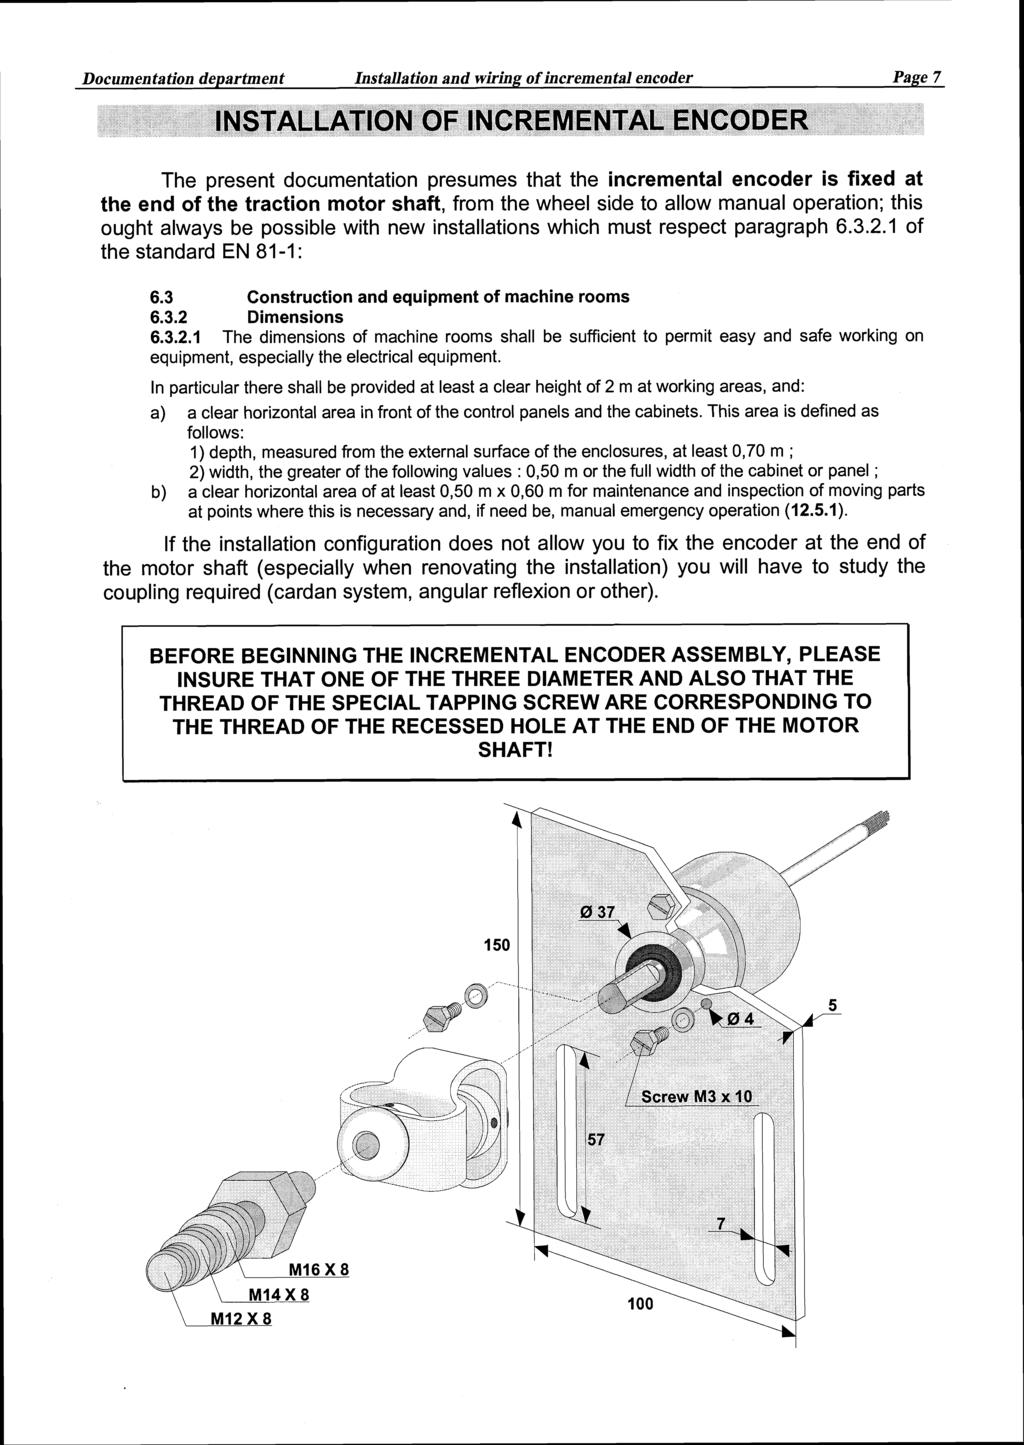 Documentation department Installation and wiring of incremental encoder Page 7 INSTALLATION OF INCREMENTAL ENCODER The present documentation presumes that the incremental encoder is fixed at the end